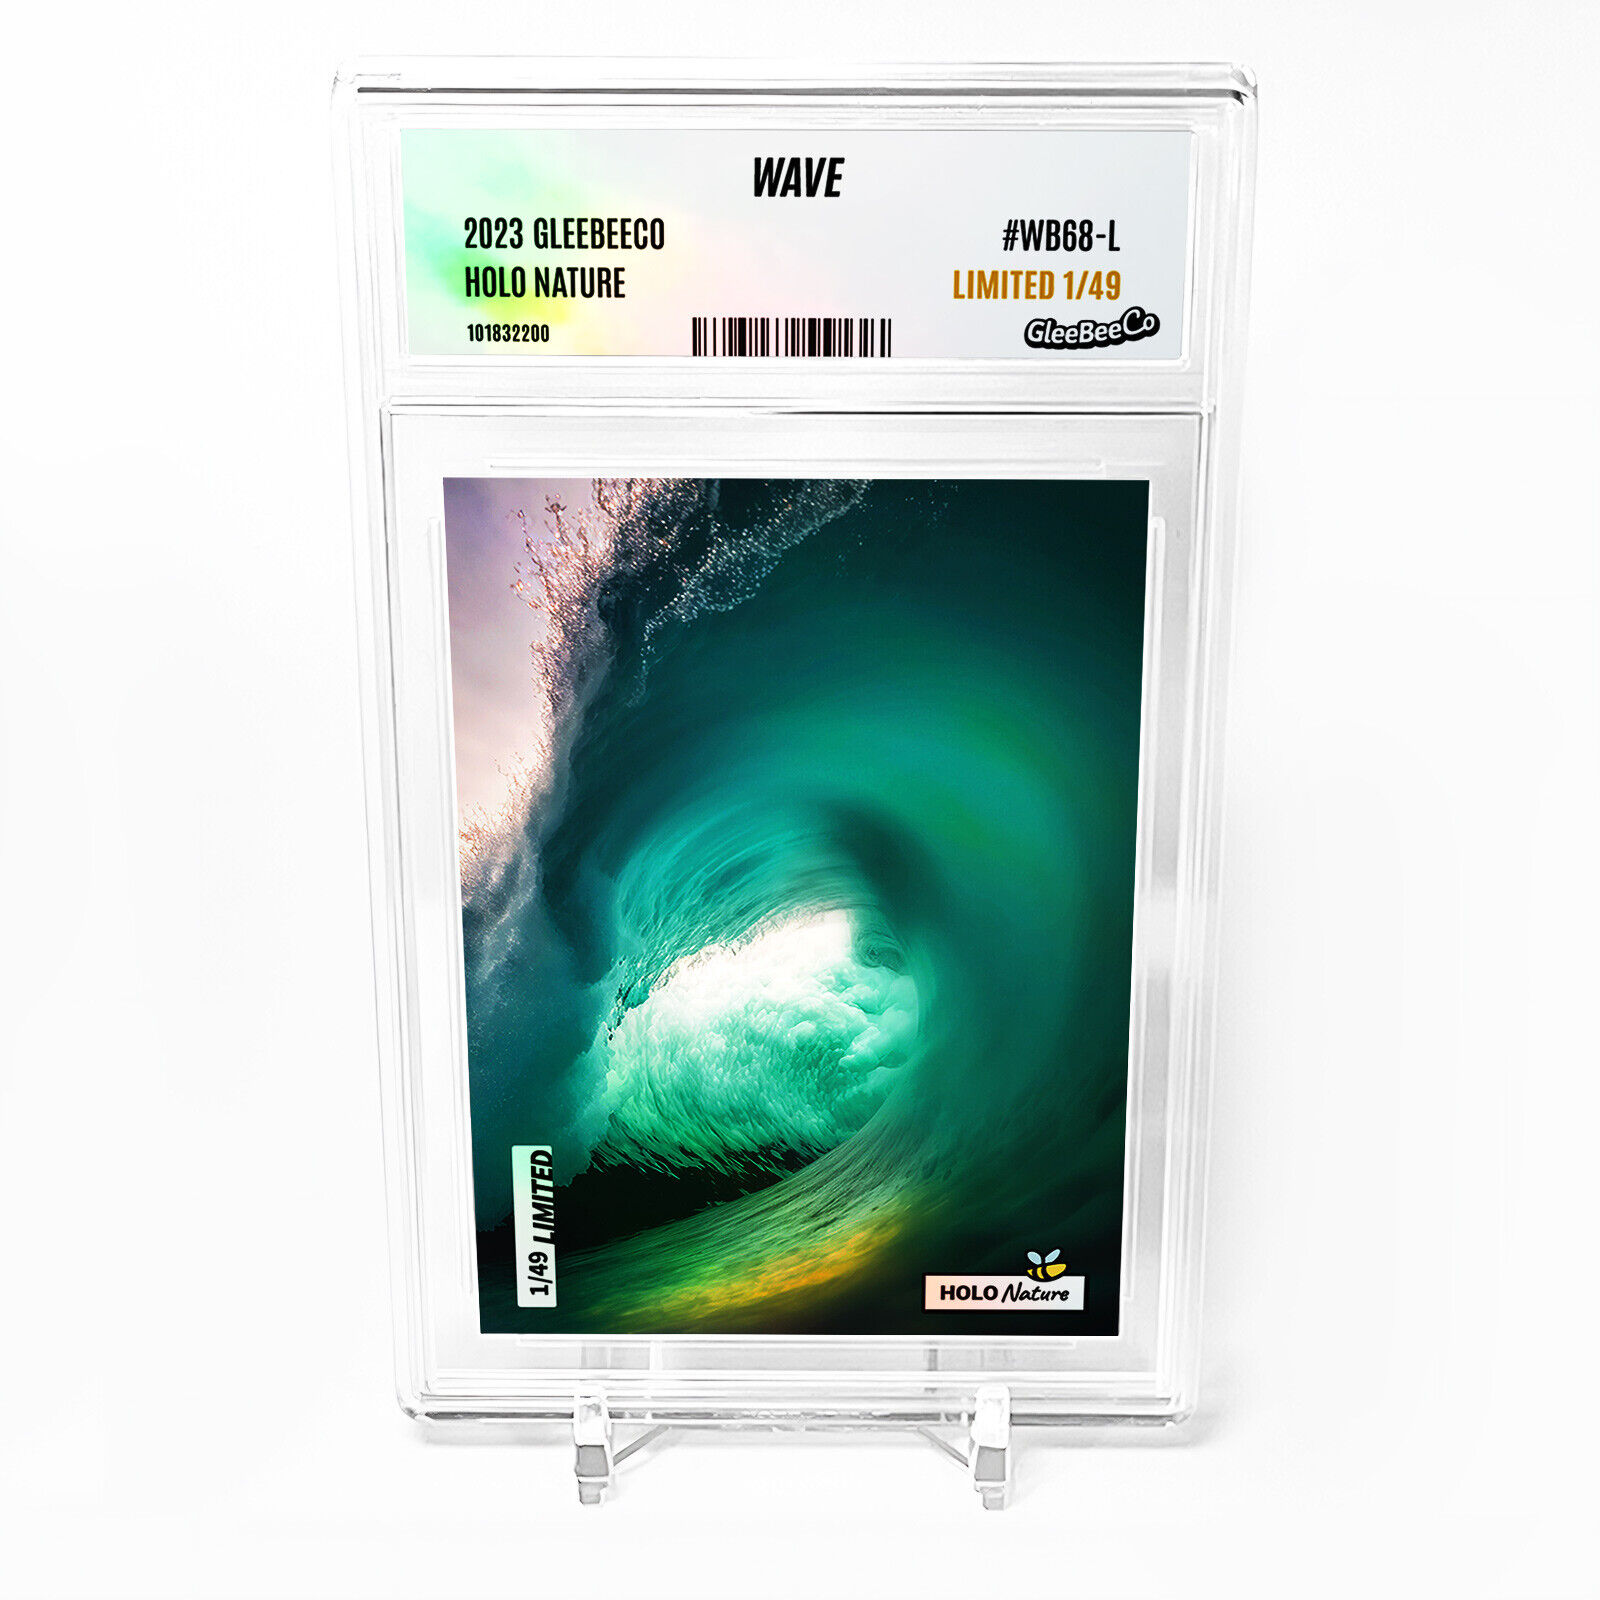 WAVE Card 2023 GleeBeeCo Holo Nature Breaking #WB68-L Limited to Only /49